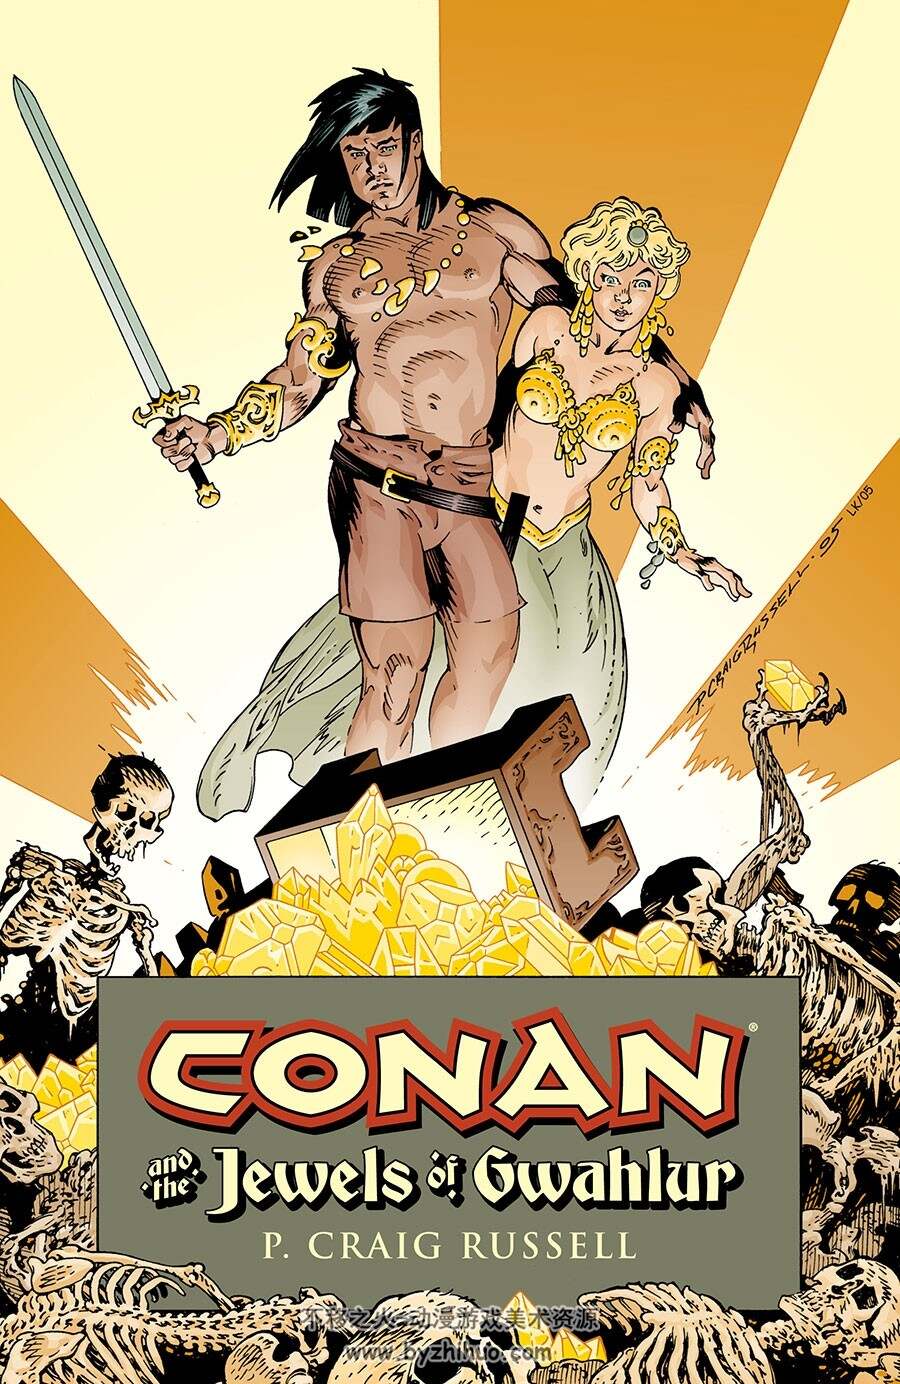 Conan and the Jewels of Gwahlur 全一册 P. Craig Russell 蛮王柯南漫画